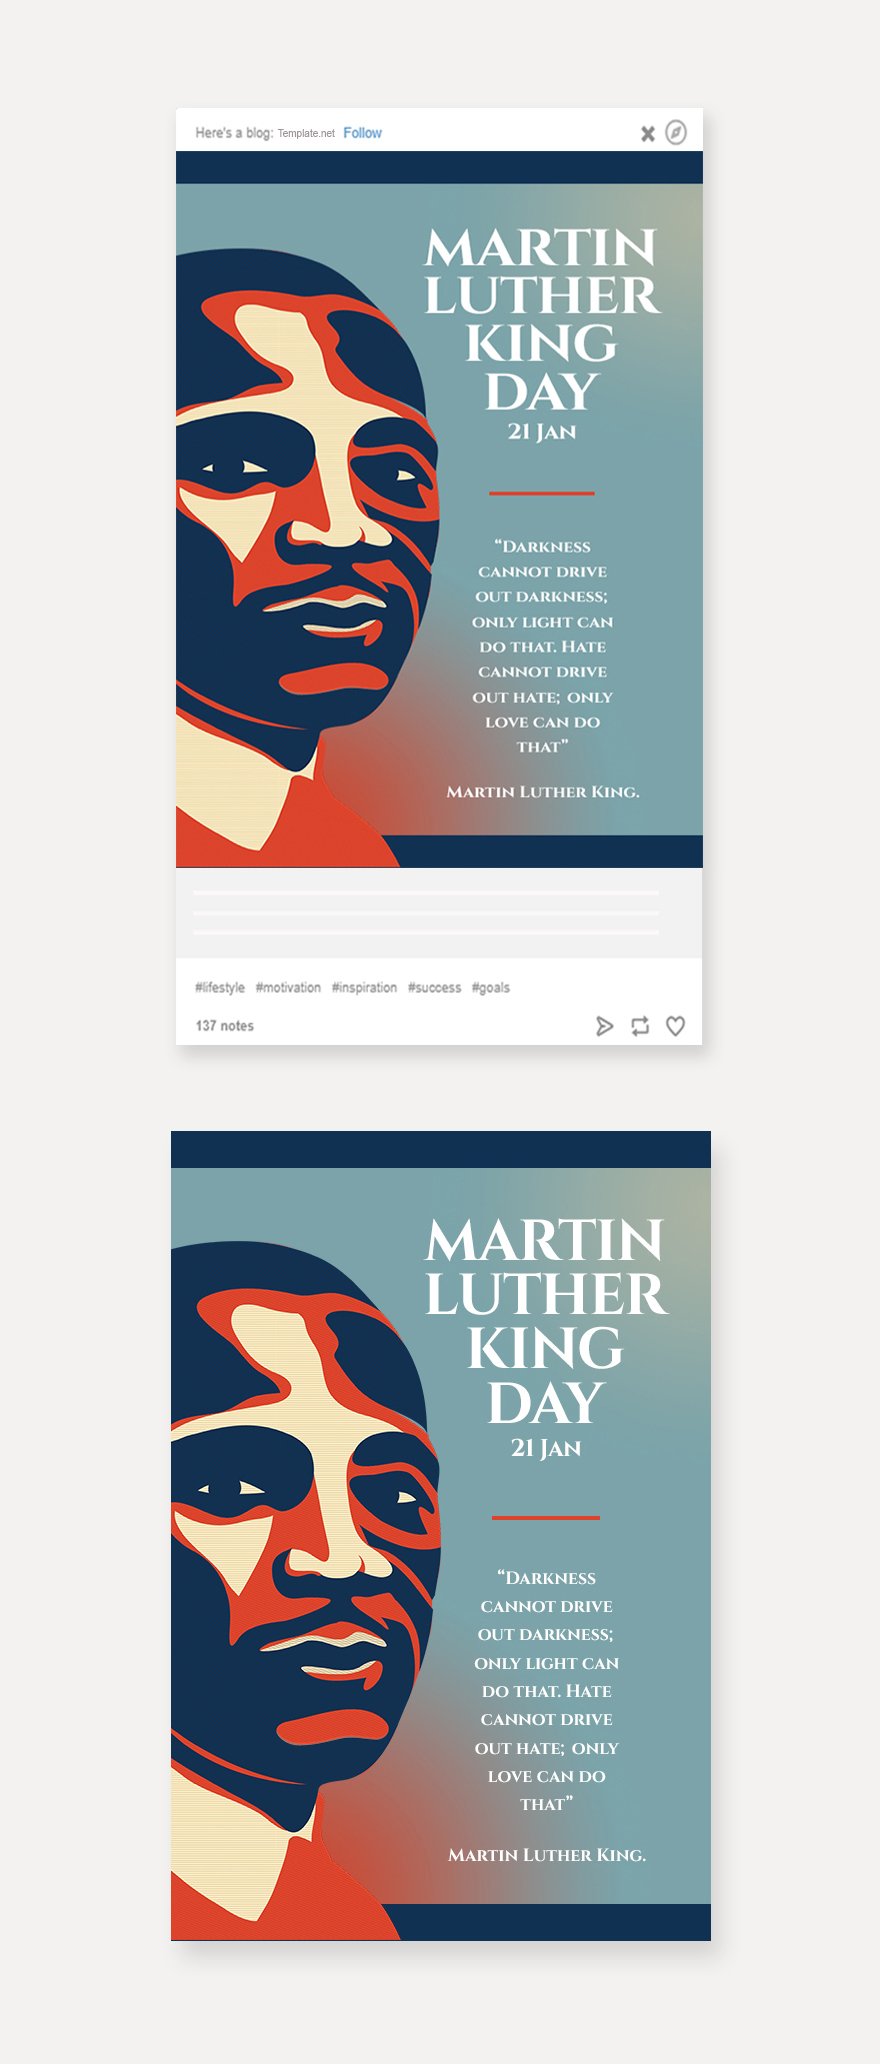 Free Martin Luther King Day Tumblr Post Template in PSD